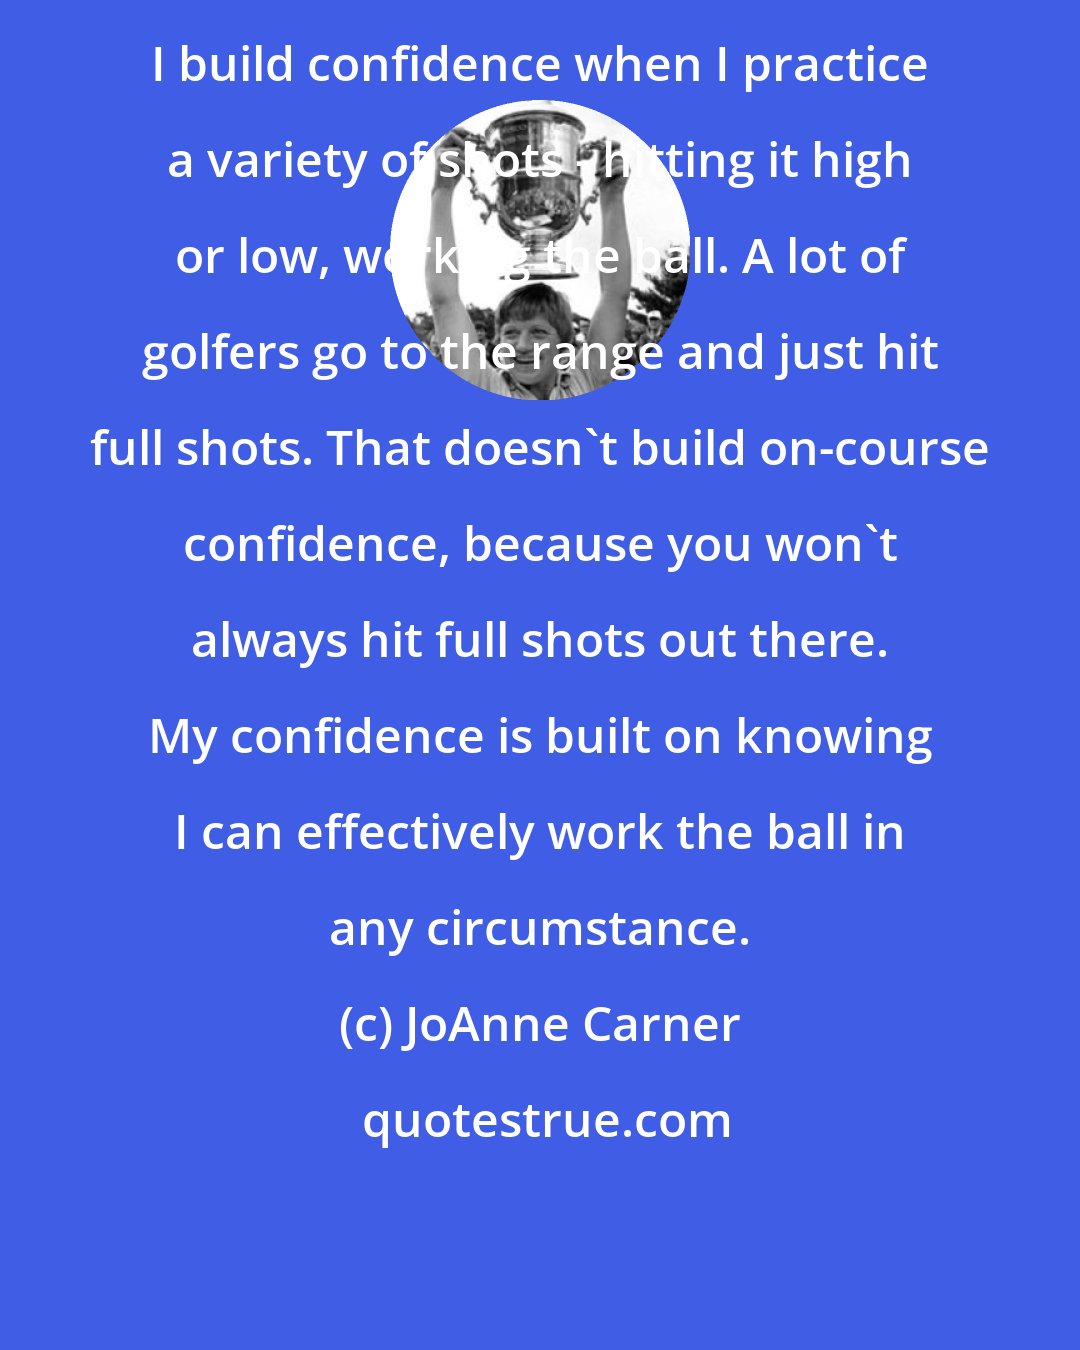 JoAnne Carner: I build confidence when I practice a variety of shots - hitting it high or low, working the ball. A lot of golfers go to the range and just hit full shots. That doesn't build on-course confidence, because you won't always hit full shots out there. My confidence is built on knowing I can effectively work the ball in any circumstance.